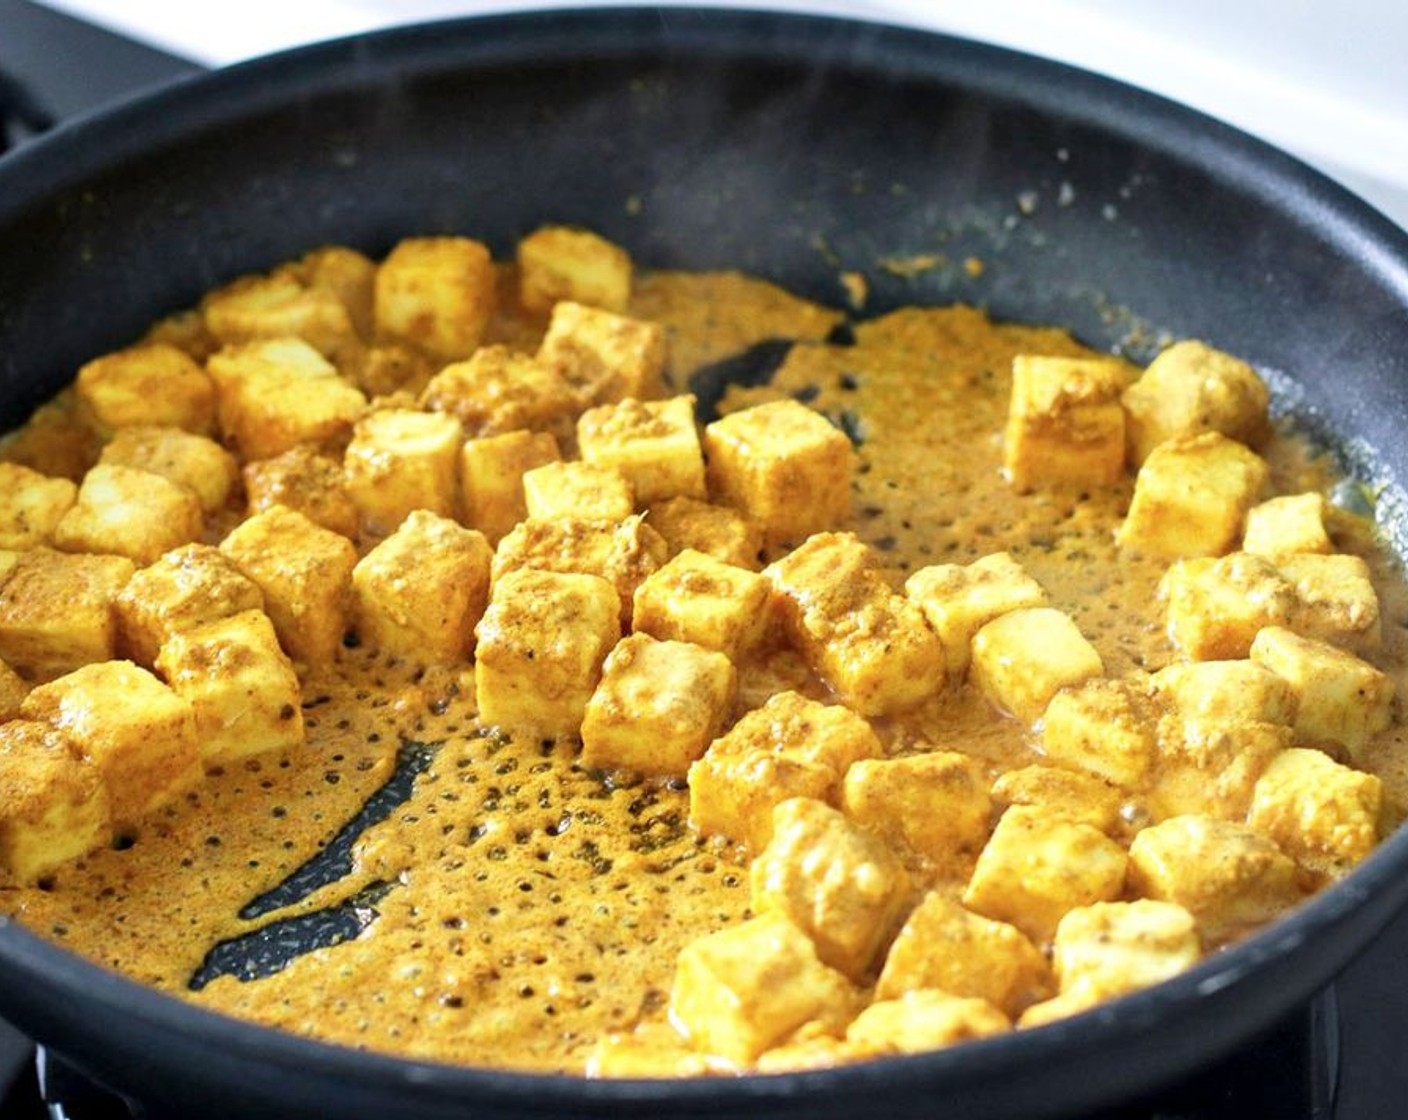 step 3 When ready to cook, heat the Unsalted Butter (1 Tbsp) and Olive Oil (1 Tbsp) in a large nonstick skillet or frying pan over medium-high heat. Once hot, add the marinated paneer and the remaining marinade in the bowl to the pan. Cook for 5-6 minutes, while carefully turning the paneer with a spatula, until the marinade is no longer “wet.” Turn off the heat and set the pan aside.